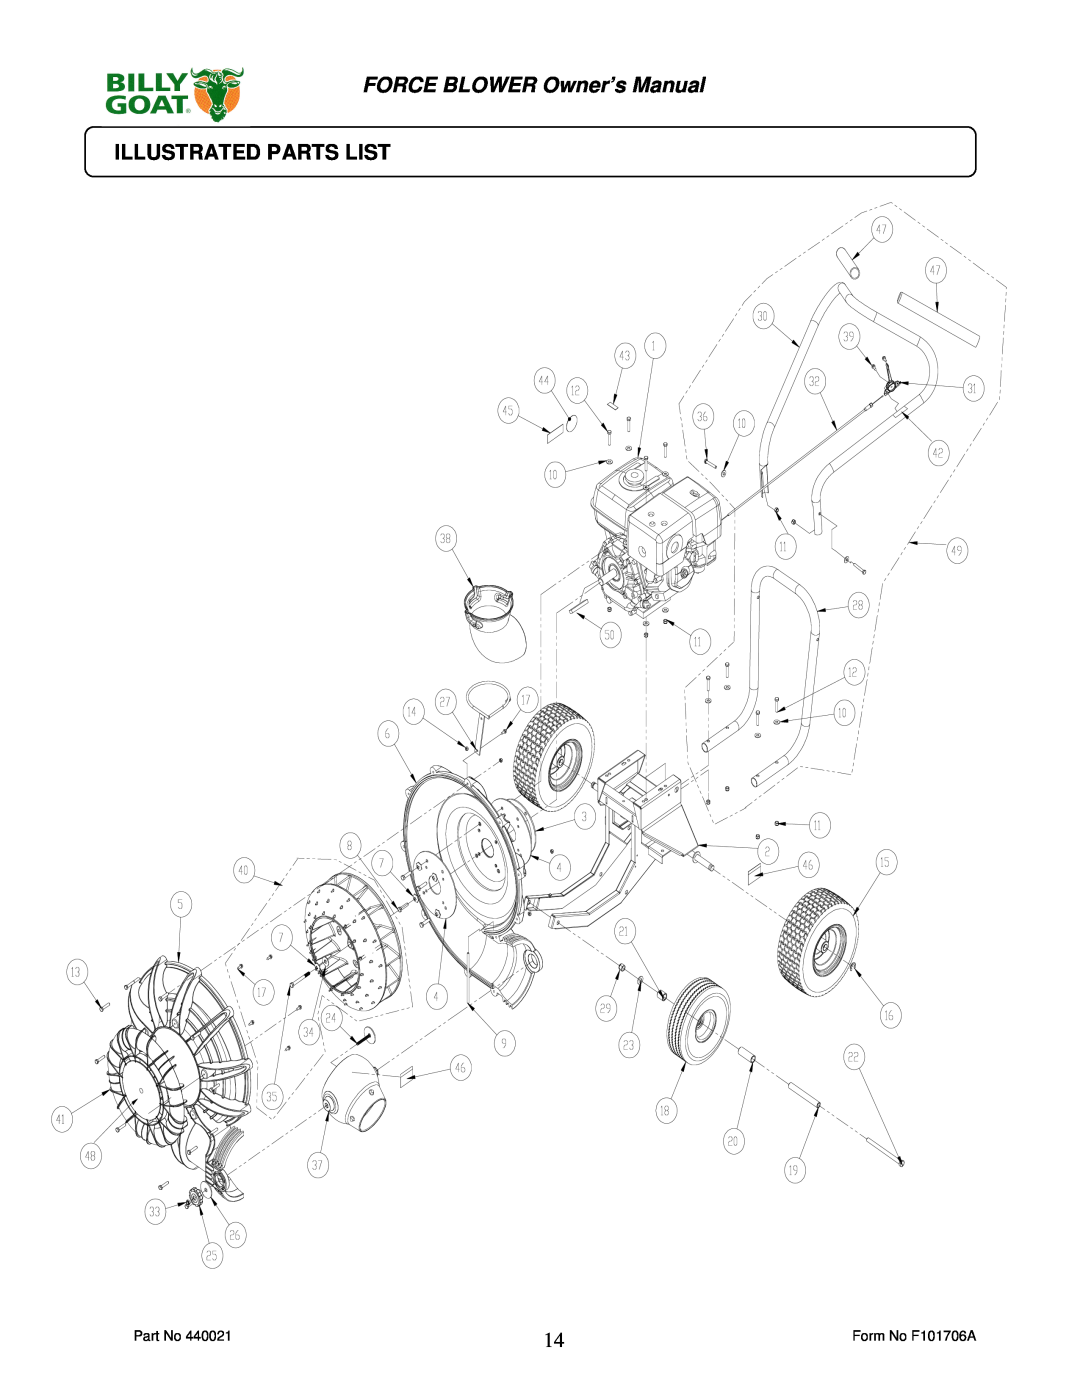 Billy Goat P / N 440120, P / N 440140 owner manual Illustrated Parts List, FORCE BLOWER Owner’s Manual 